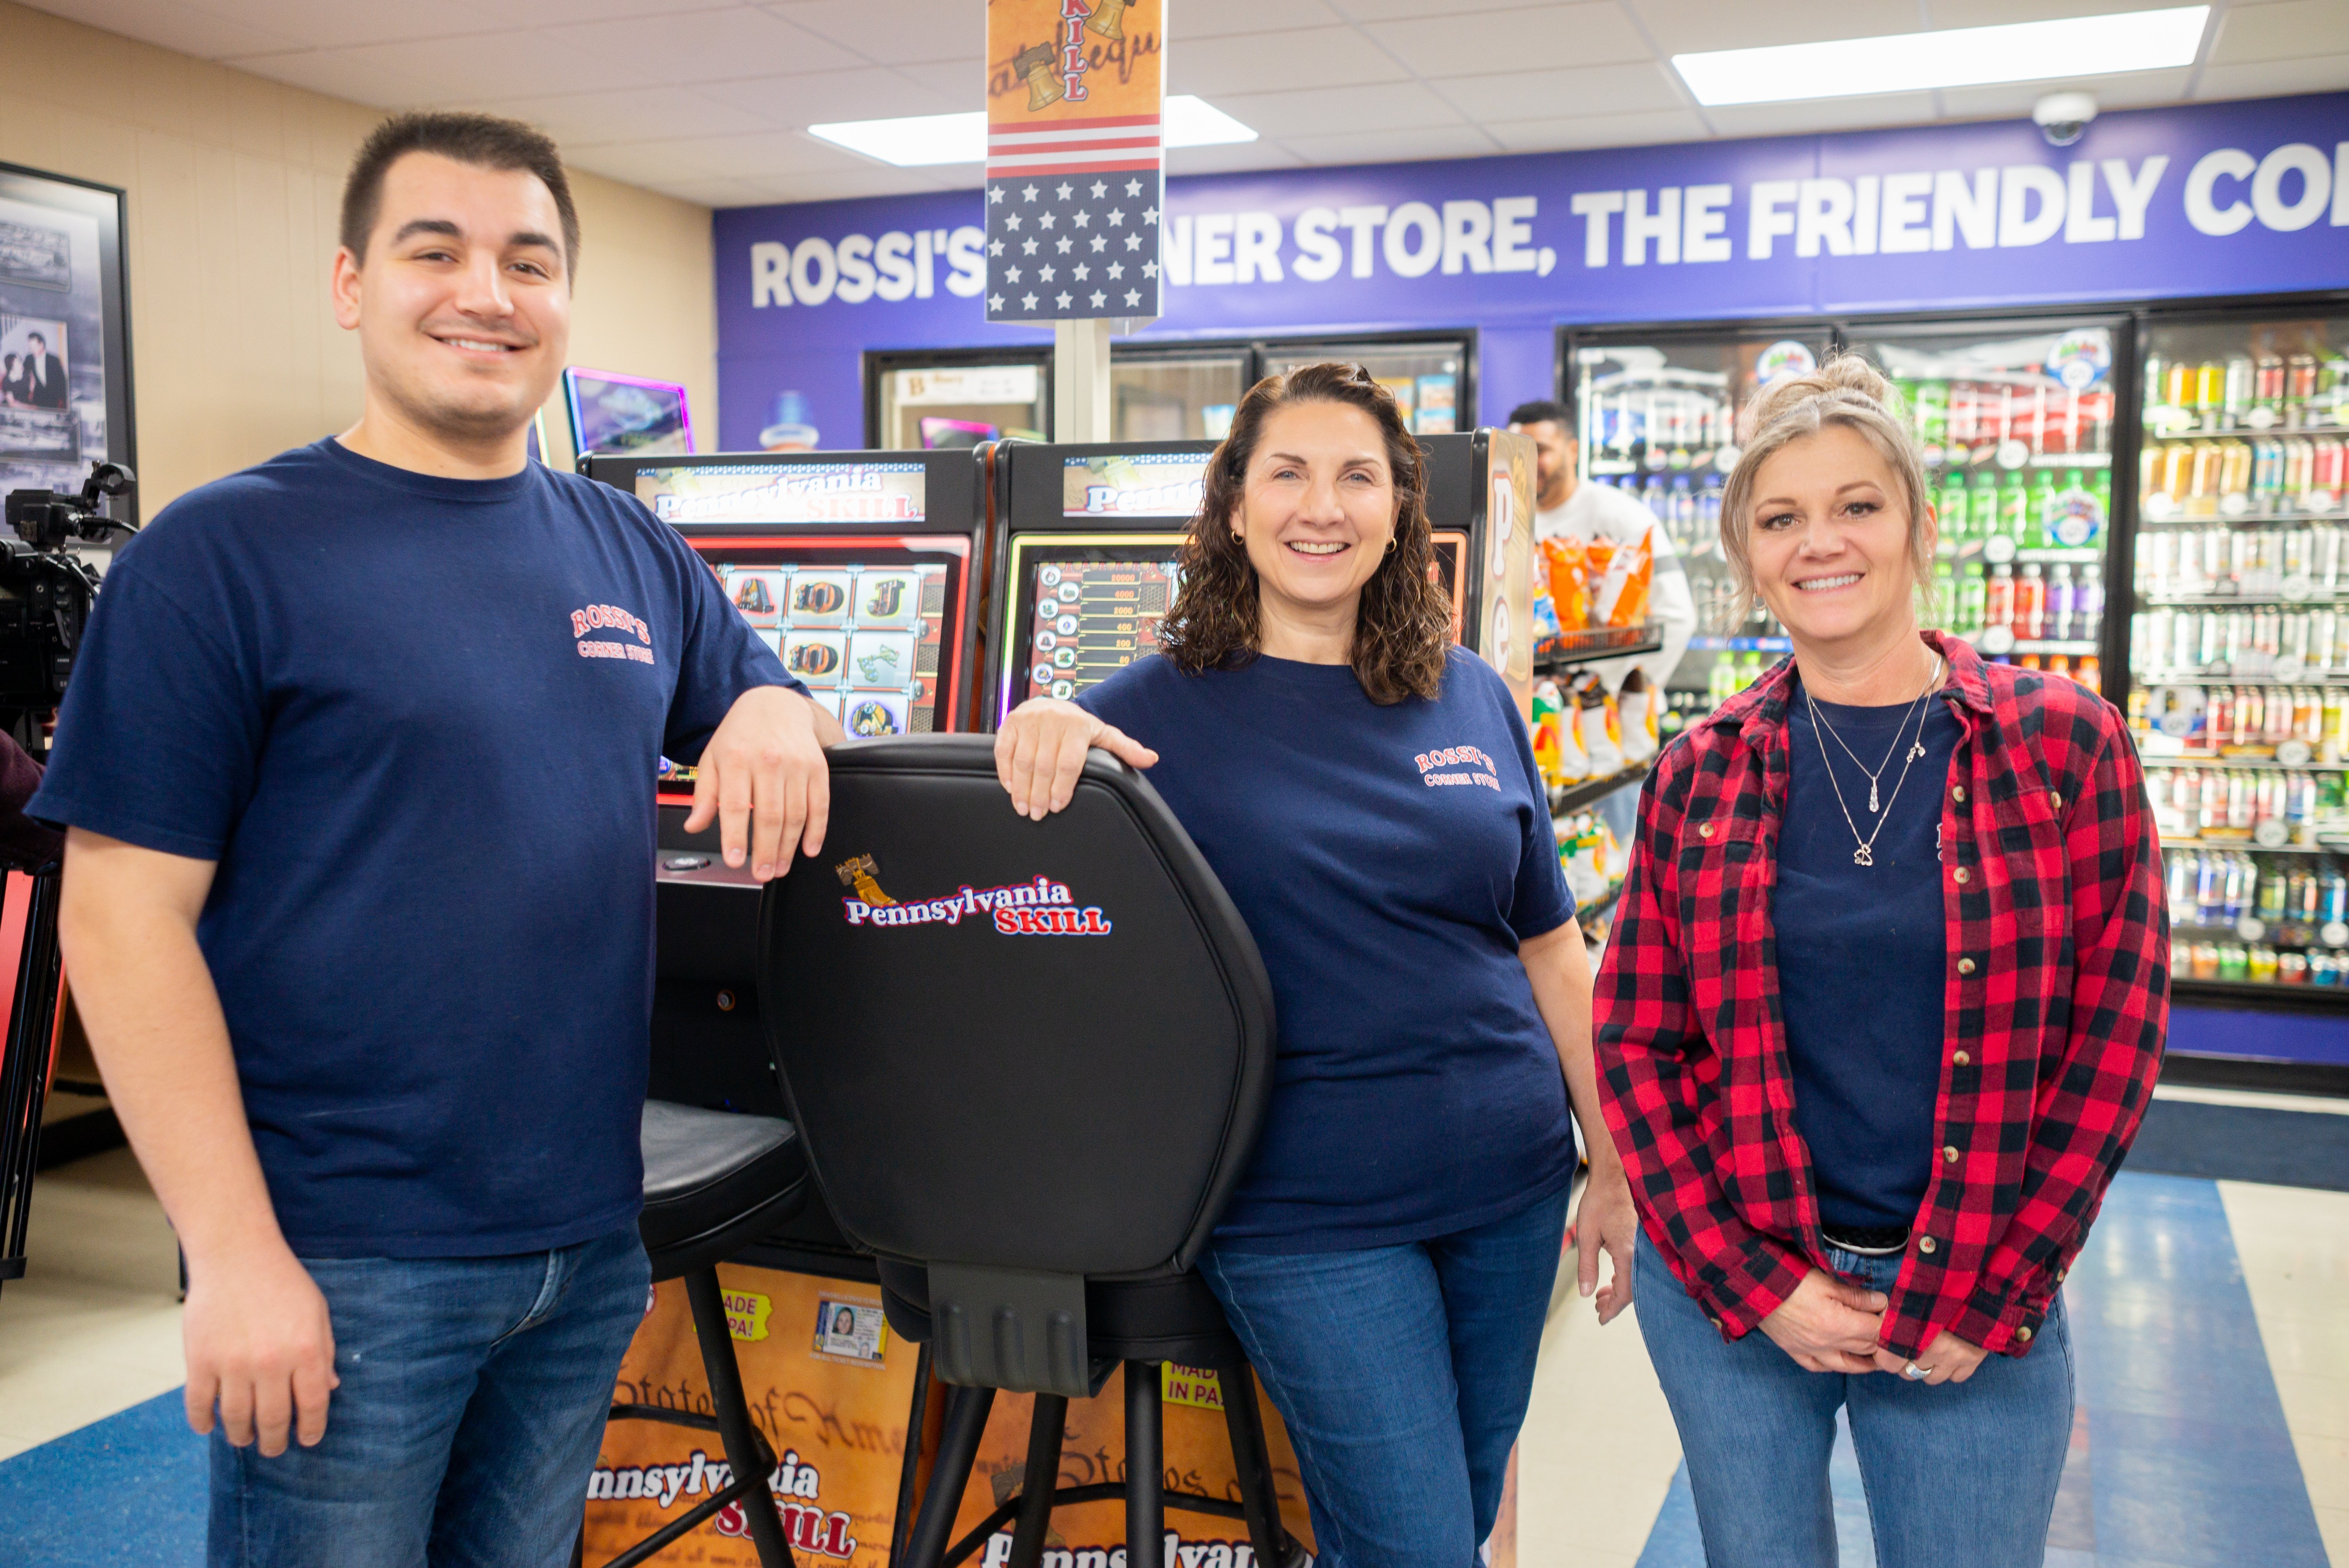 Rossi's Corner Store: A Small Business Thriving With Skill Games